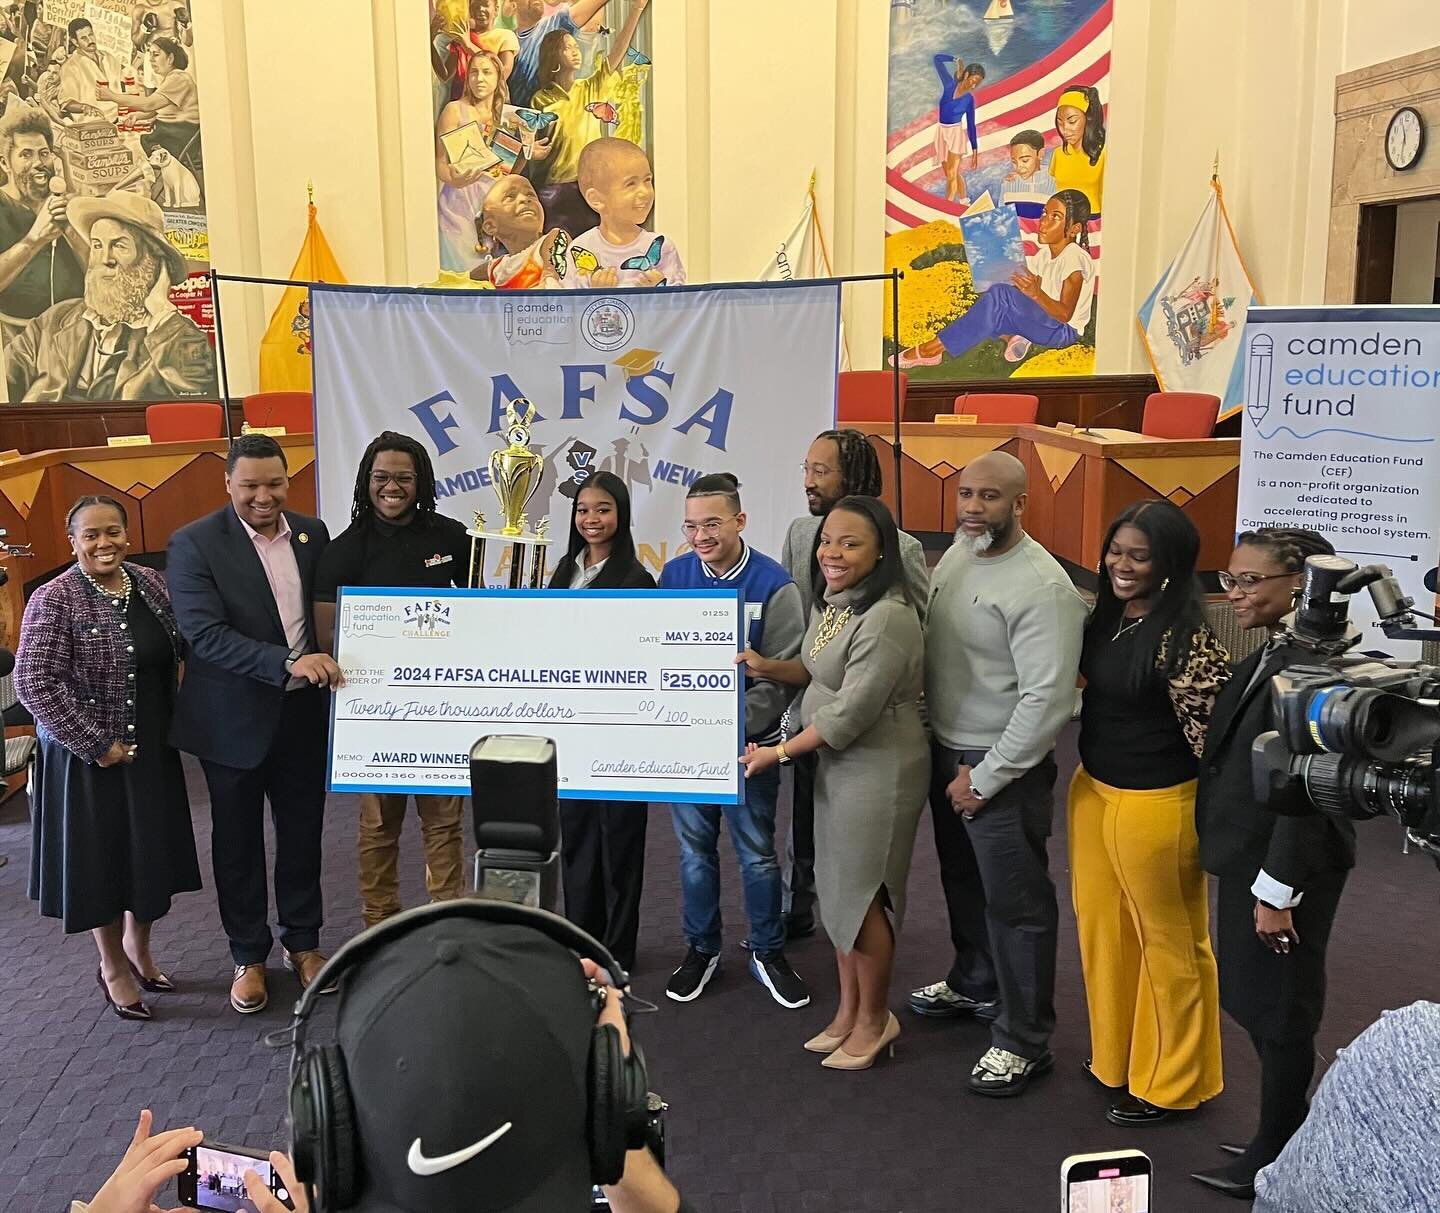 More snippets from the FAFSA press conference 📑📚

Isaiah from BPLA (one of our partner schools) spoke about the importance of FAFSA and why students should complete it, and had words of encouragement for the other schools as well! ✨

Thank you agai